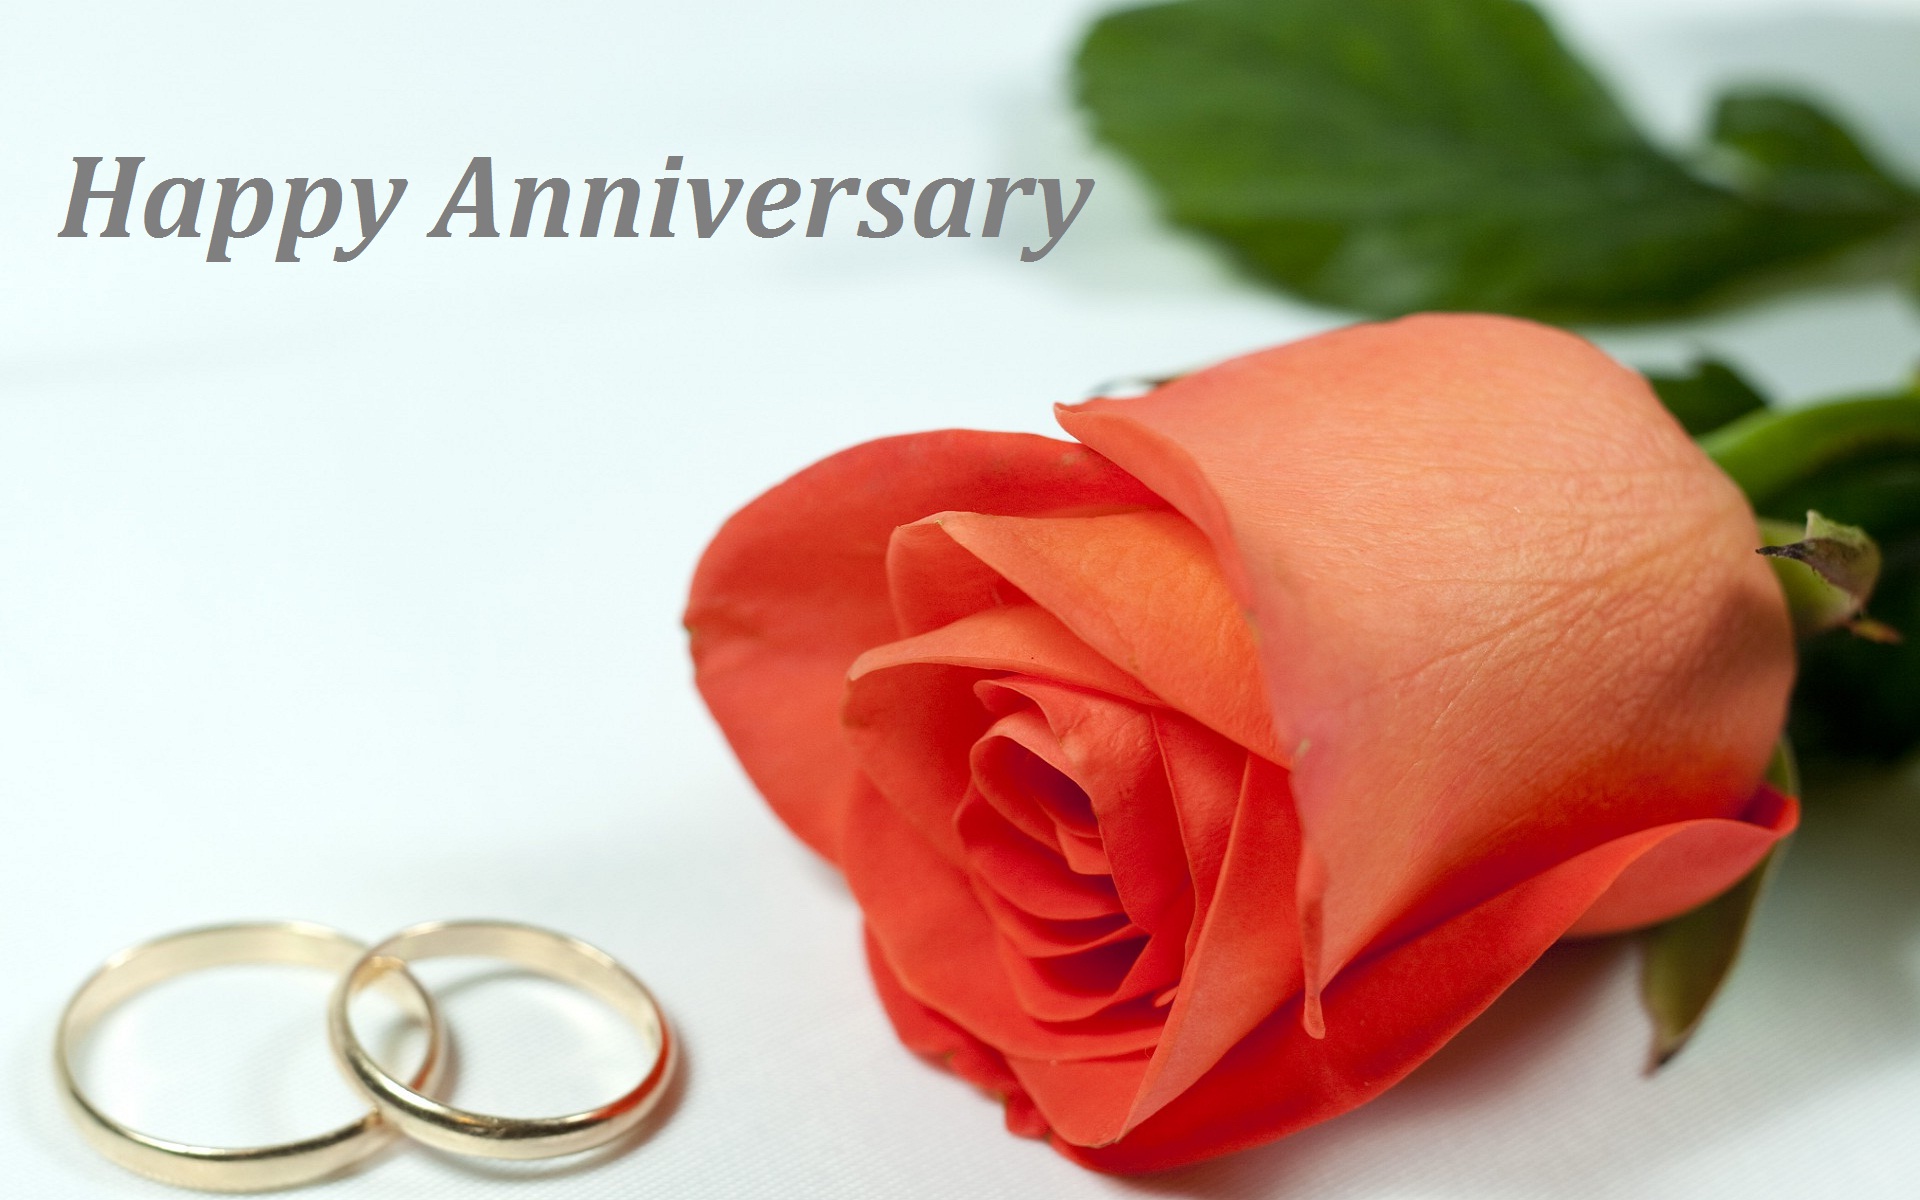 Free Download Happy Anniversary Wallpaper Gallery 19x10 For Your Desktop Mobile Tablet Explore 76 Happy Anniversary Wallpapers Christian Happy Anniversary Wallpaper Images Wedding Anniversary Wallpaper